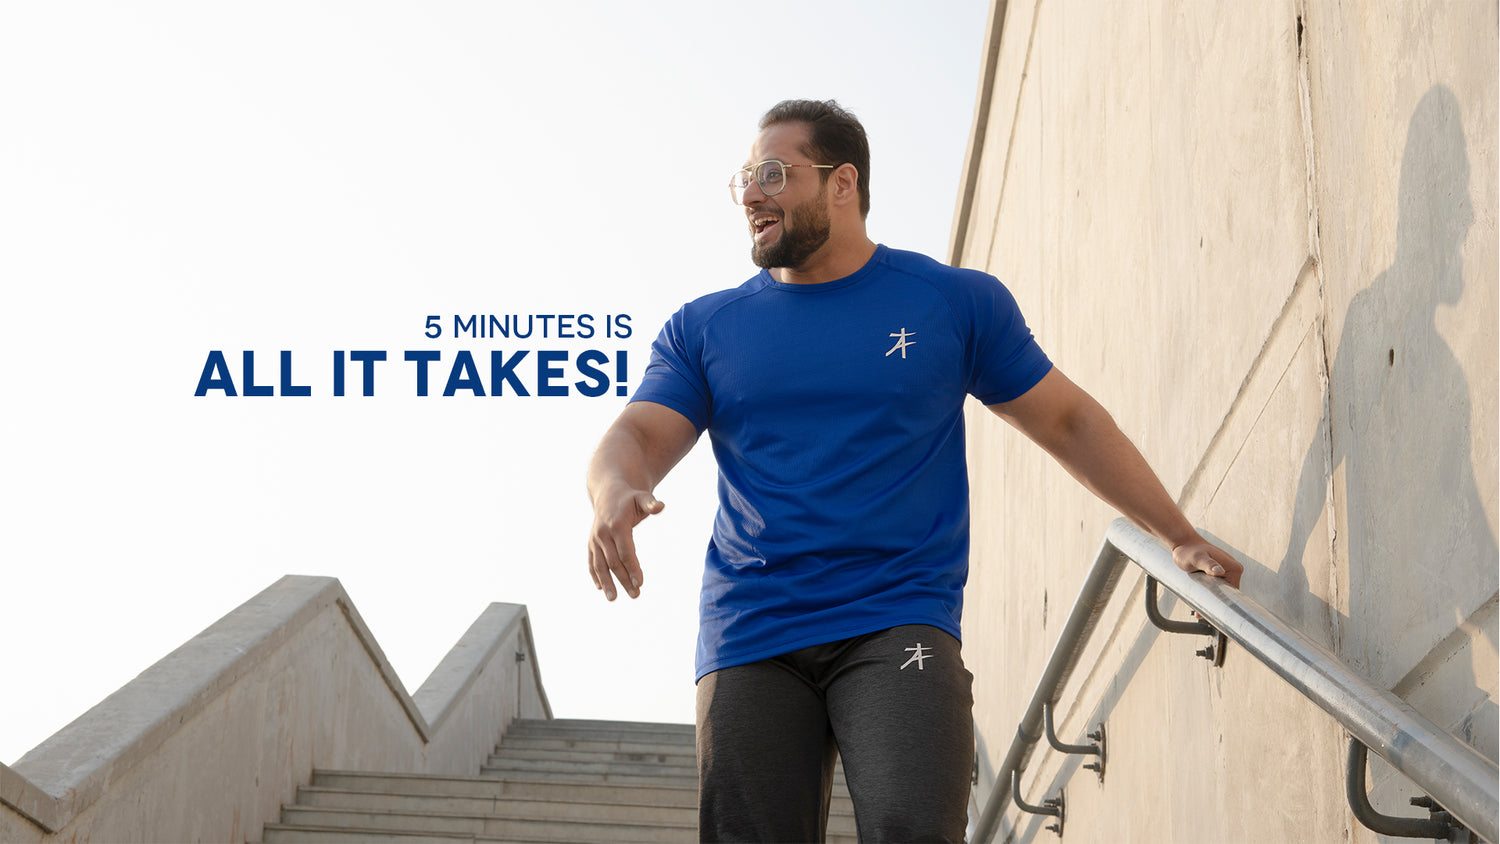 5 minutes is all it takes!